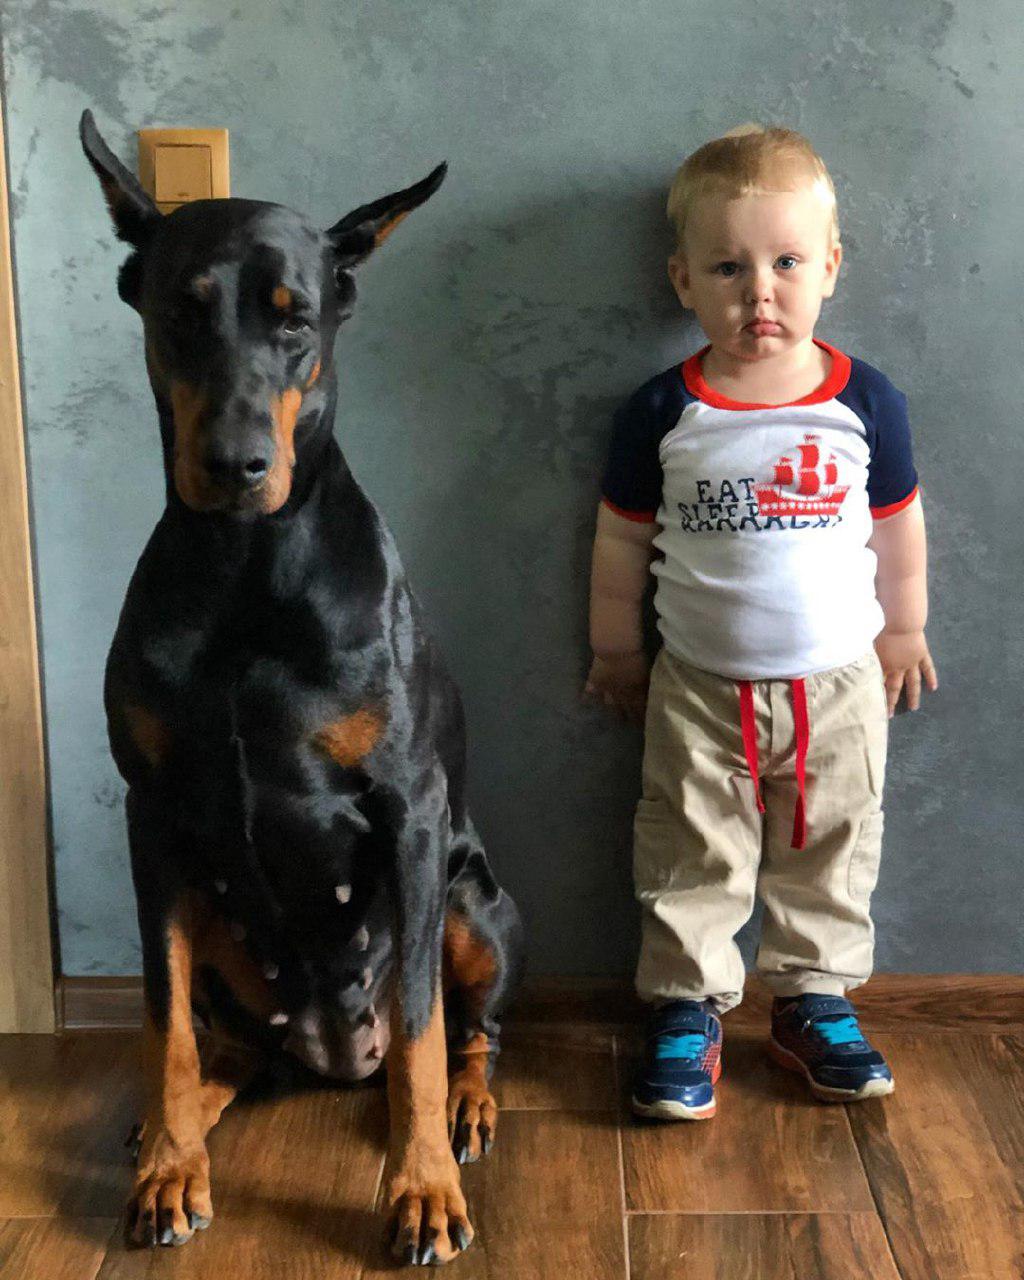 A Doberman sitting on the floor next to a toddler